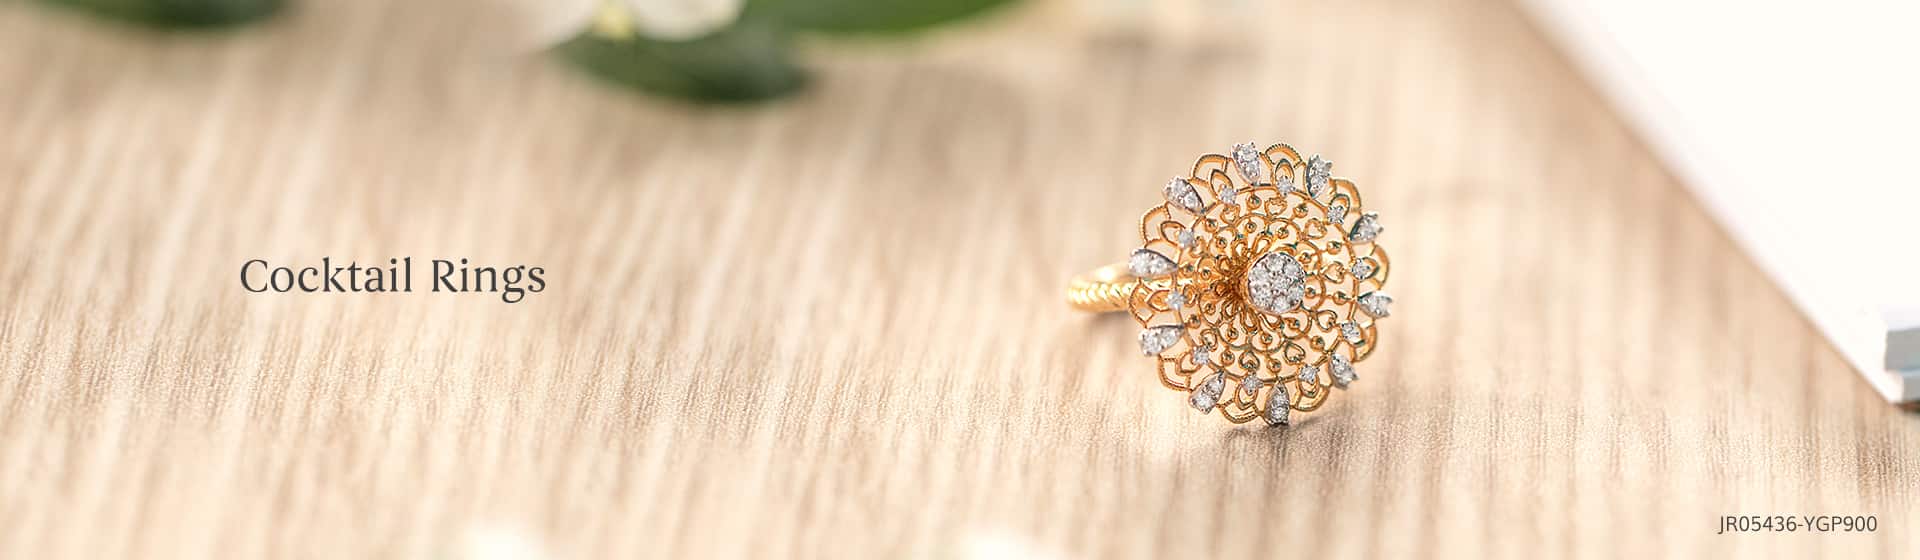 Buy Latest Cocktail Rings Designs Online in Gold, Diamond and Gemstones